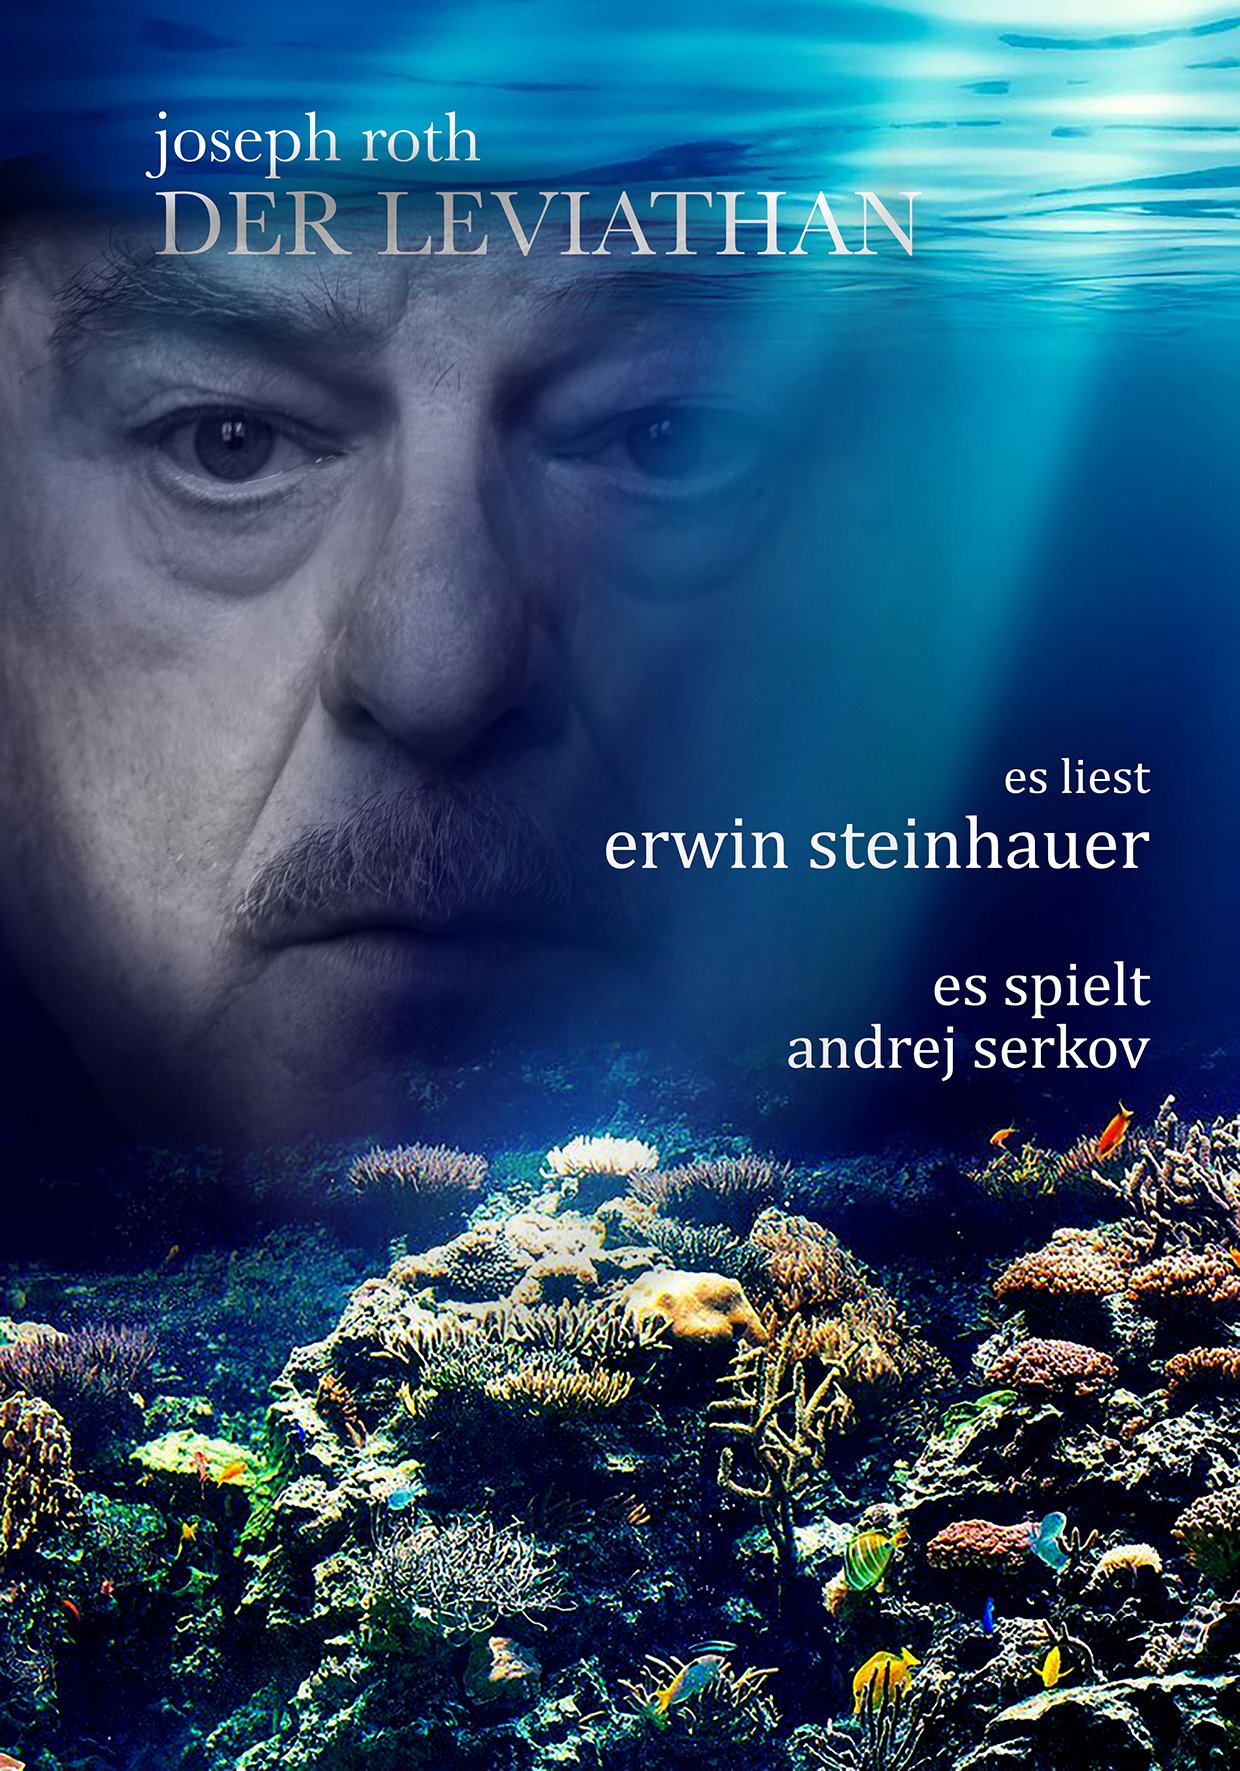 erwin coral afiche 1 TEXT small.jpeg